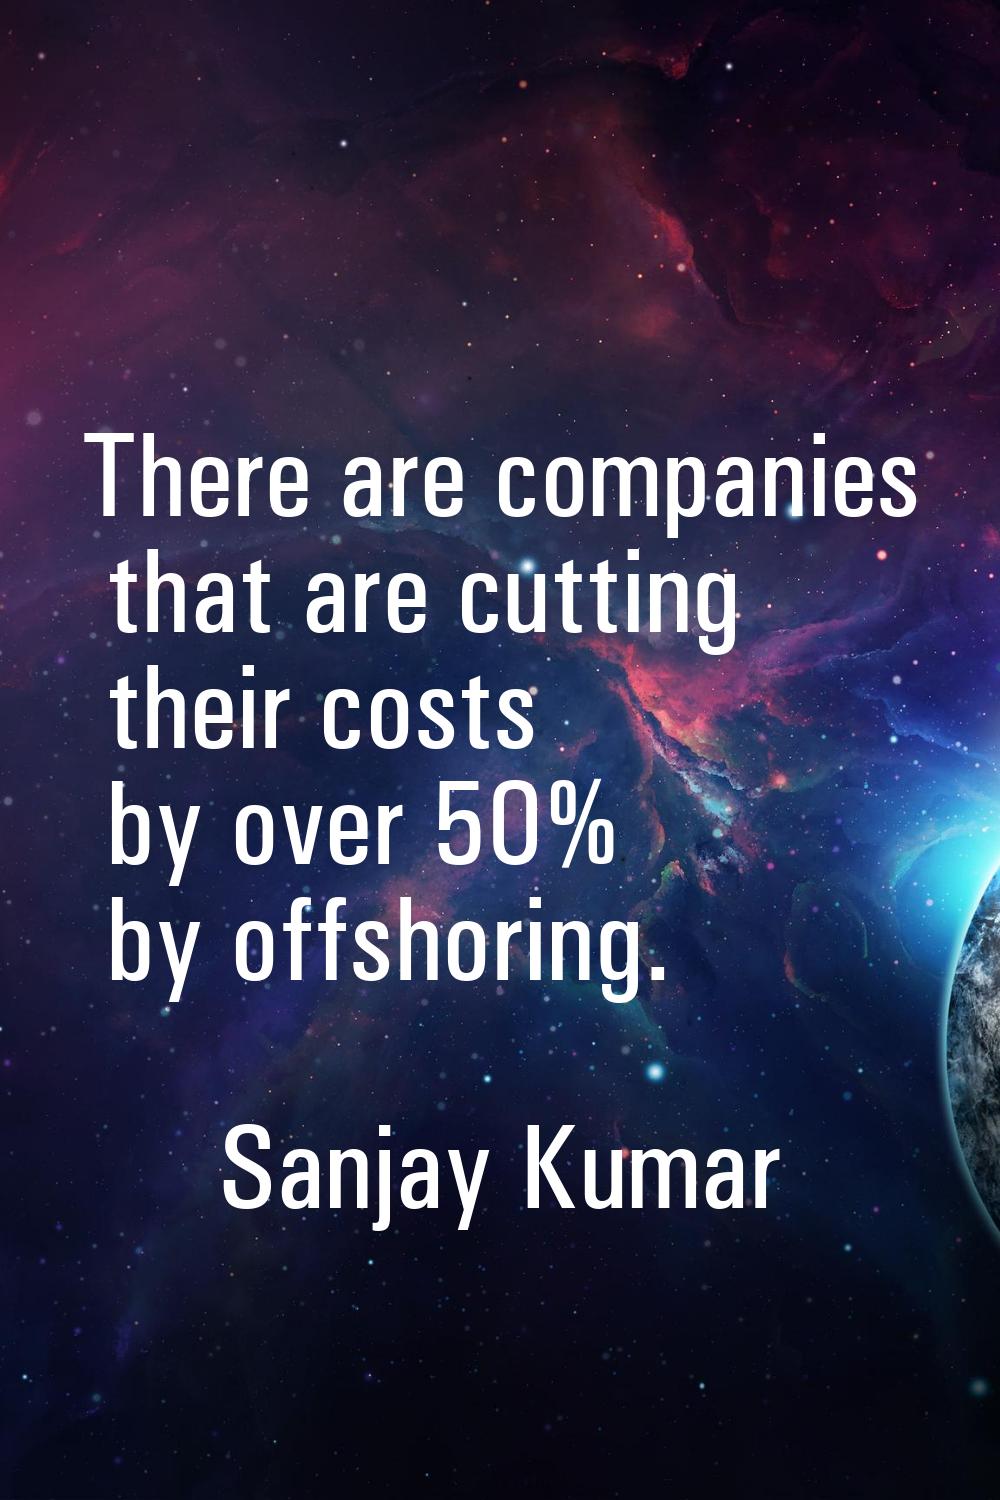 There are companies that are cutting their costs by over 50% by offshoring.